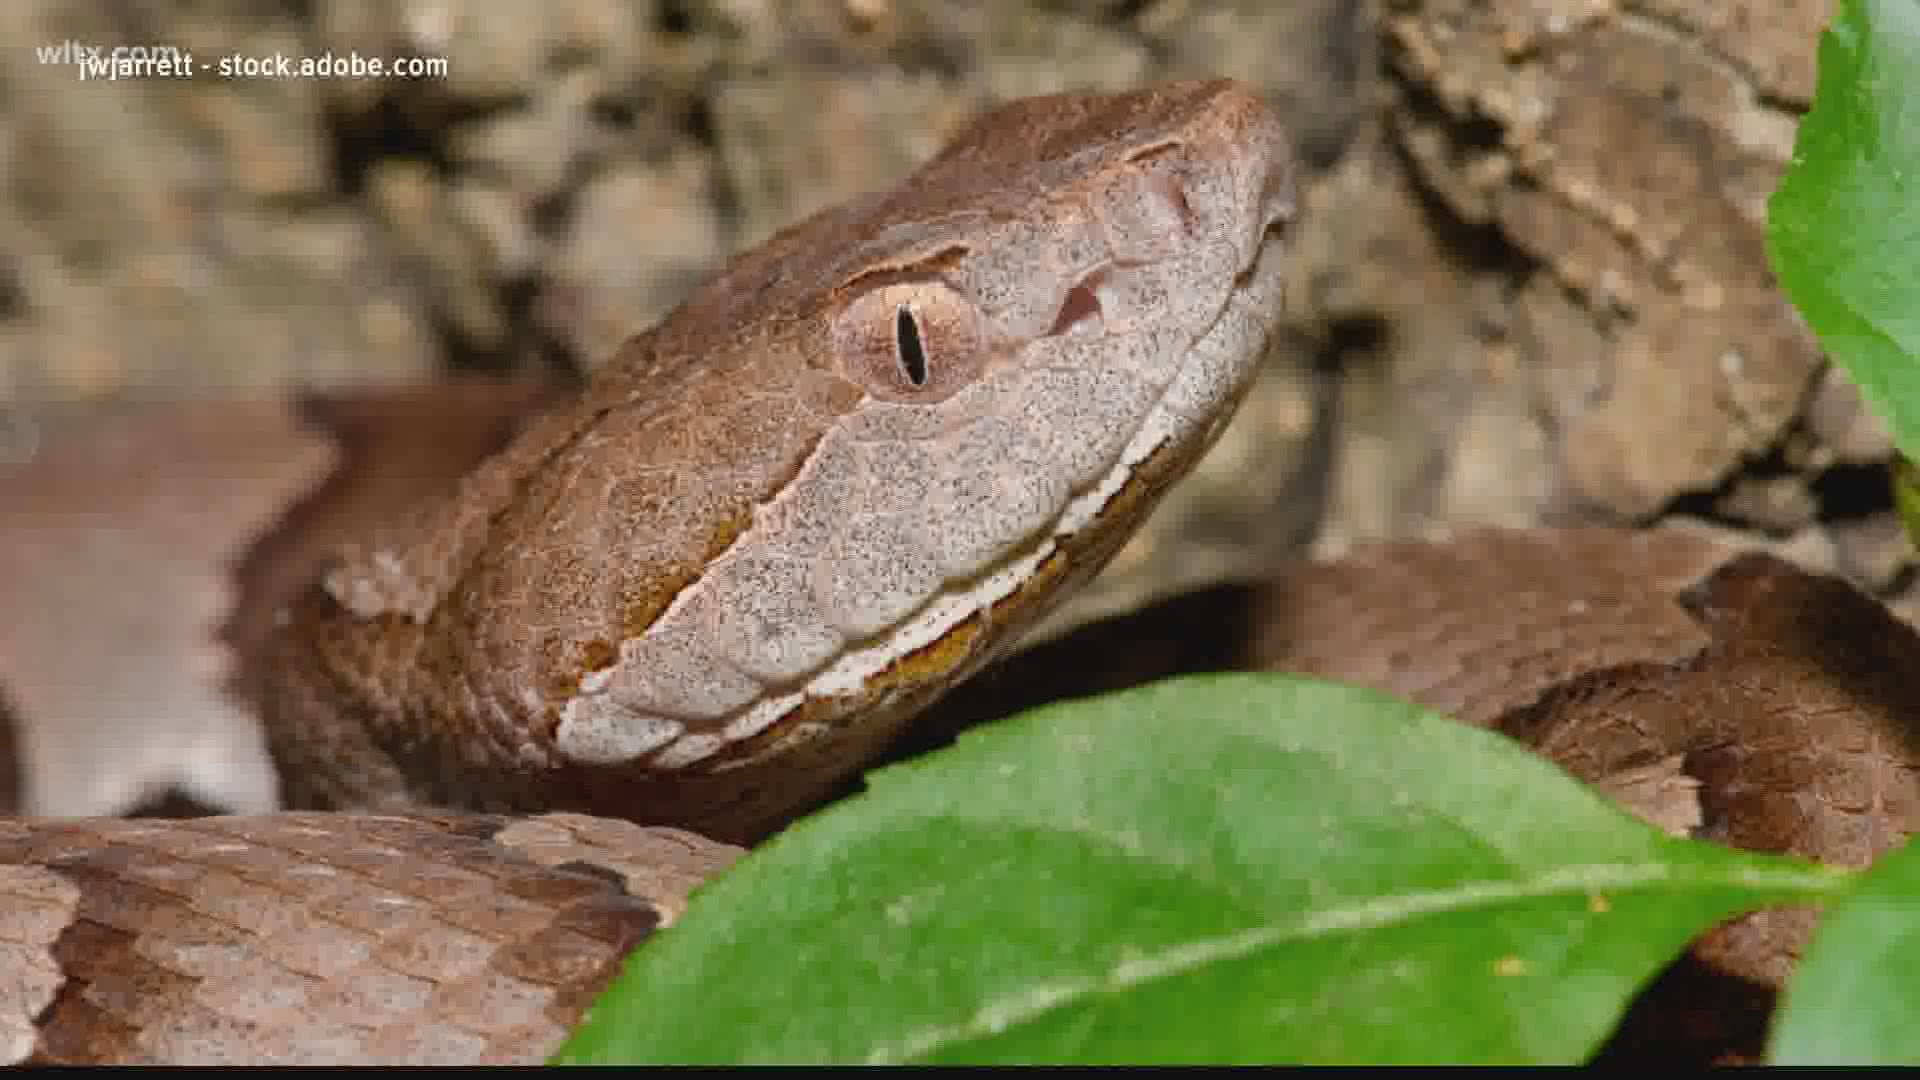 This time of year is prime time for copperheads to lay their eggs giving birth to 7 or 8 at a time.